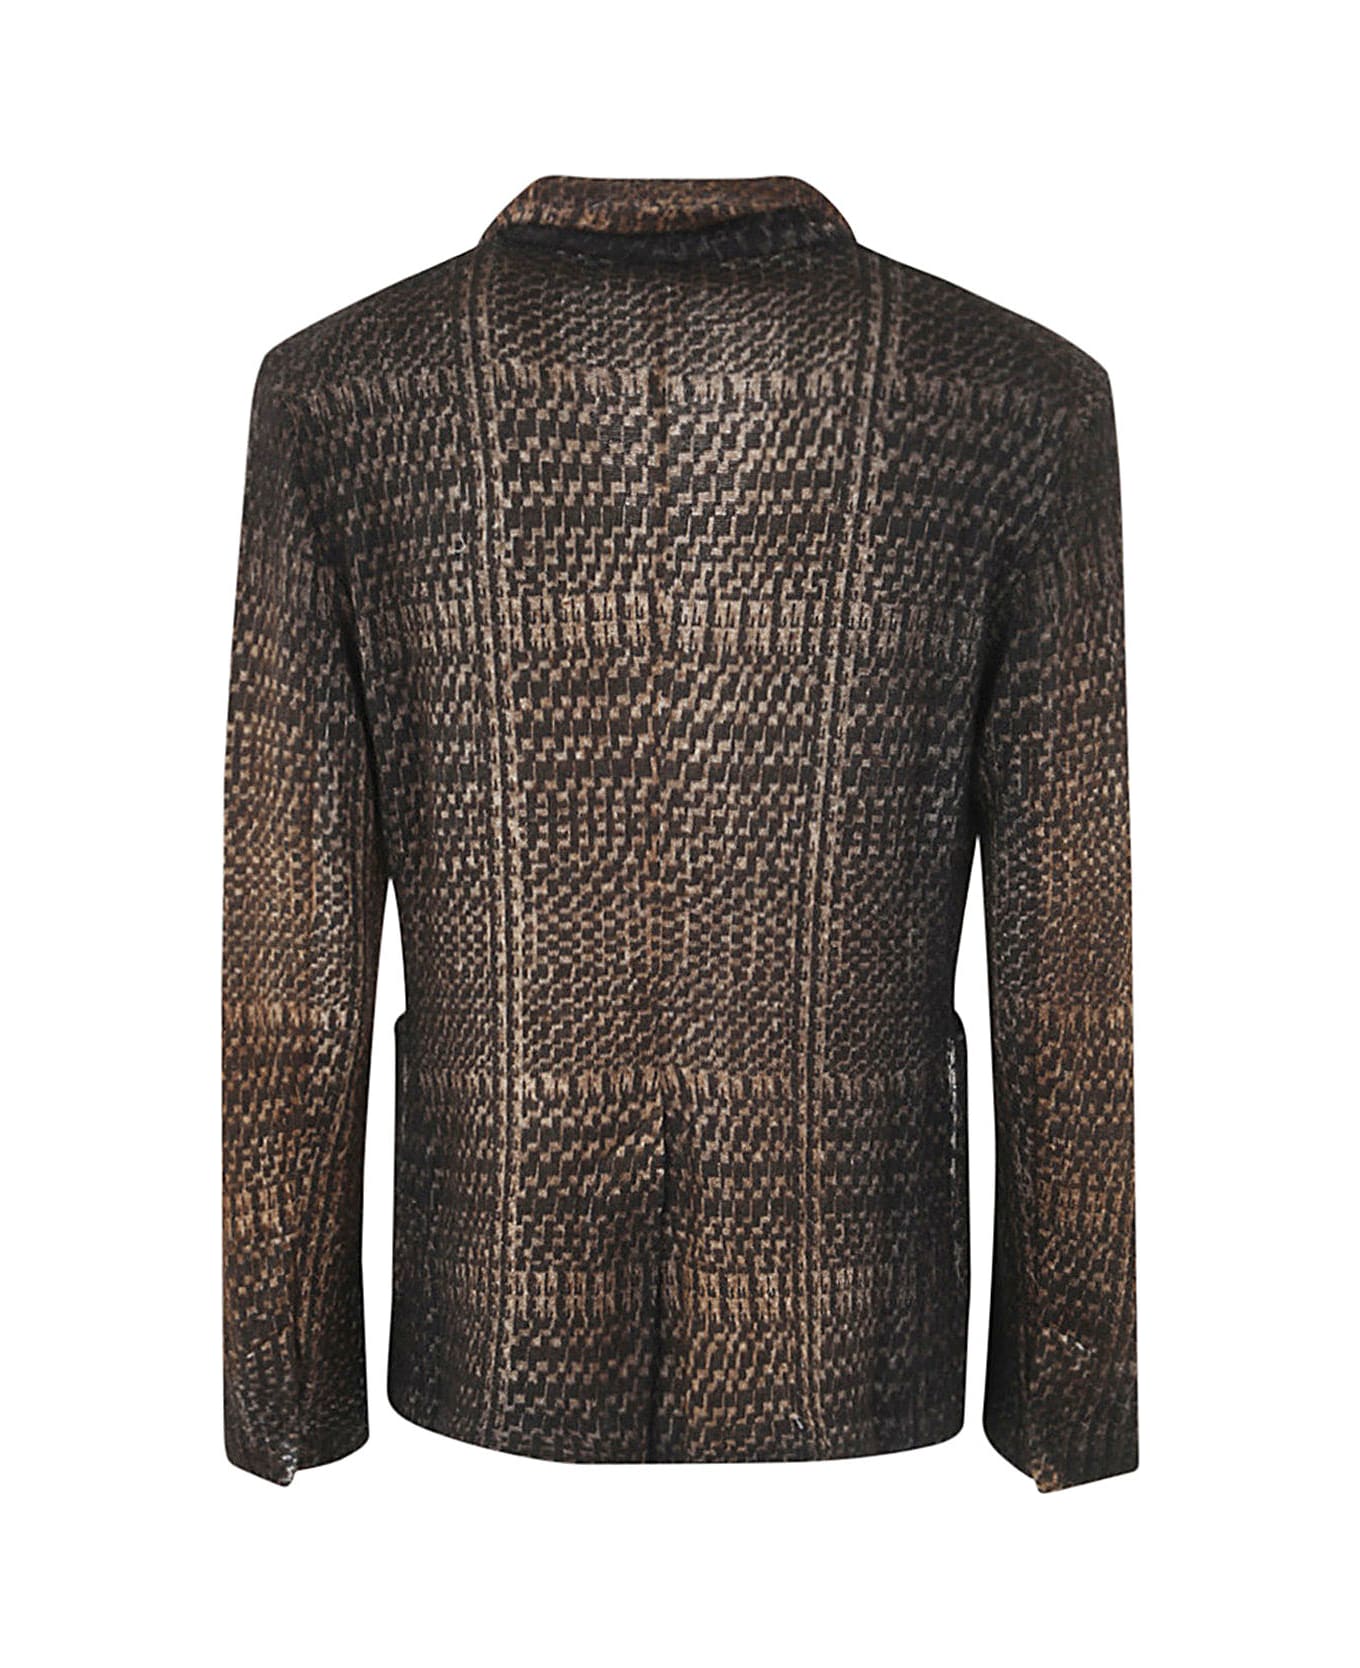 Avant Toi Prince Of Wales Jacquard Rever Jacket With Shadows - Cork カーディガン